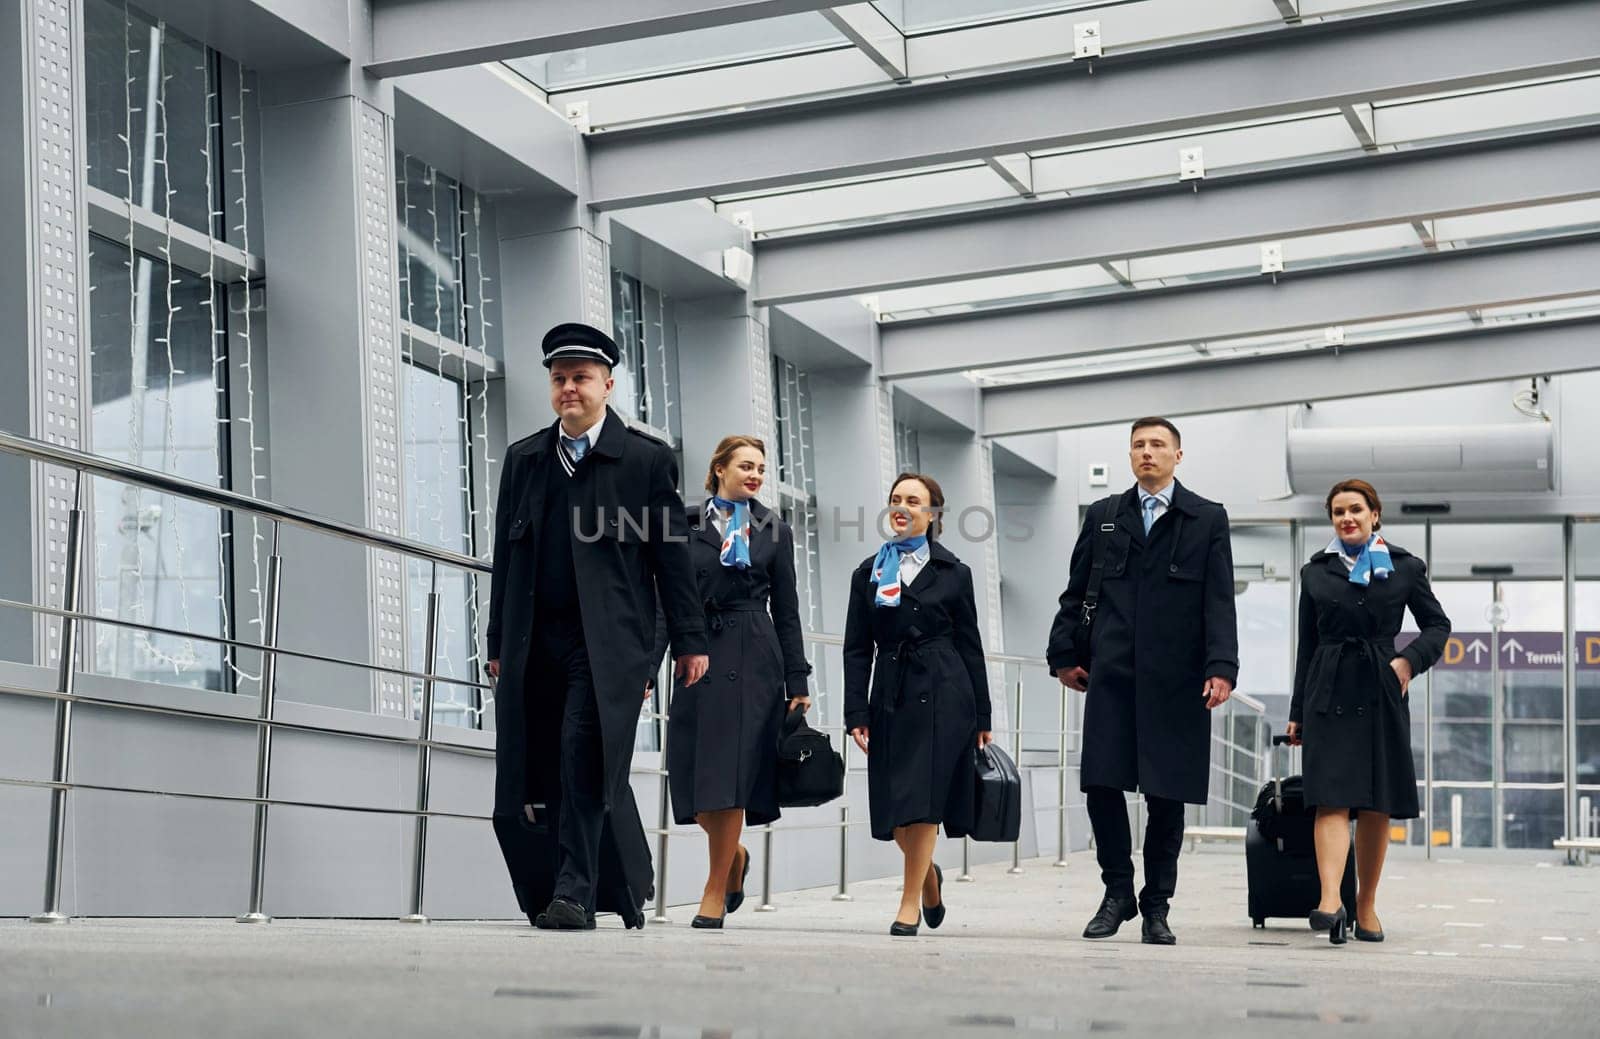 In uniform. Airplane crew in uniform is going to the work together by Standret